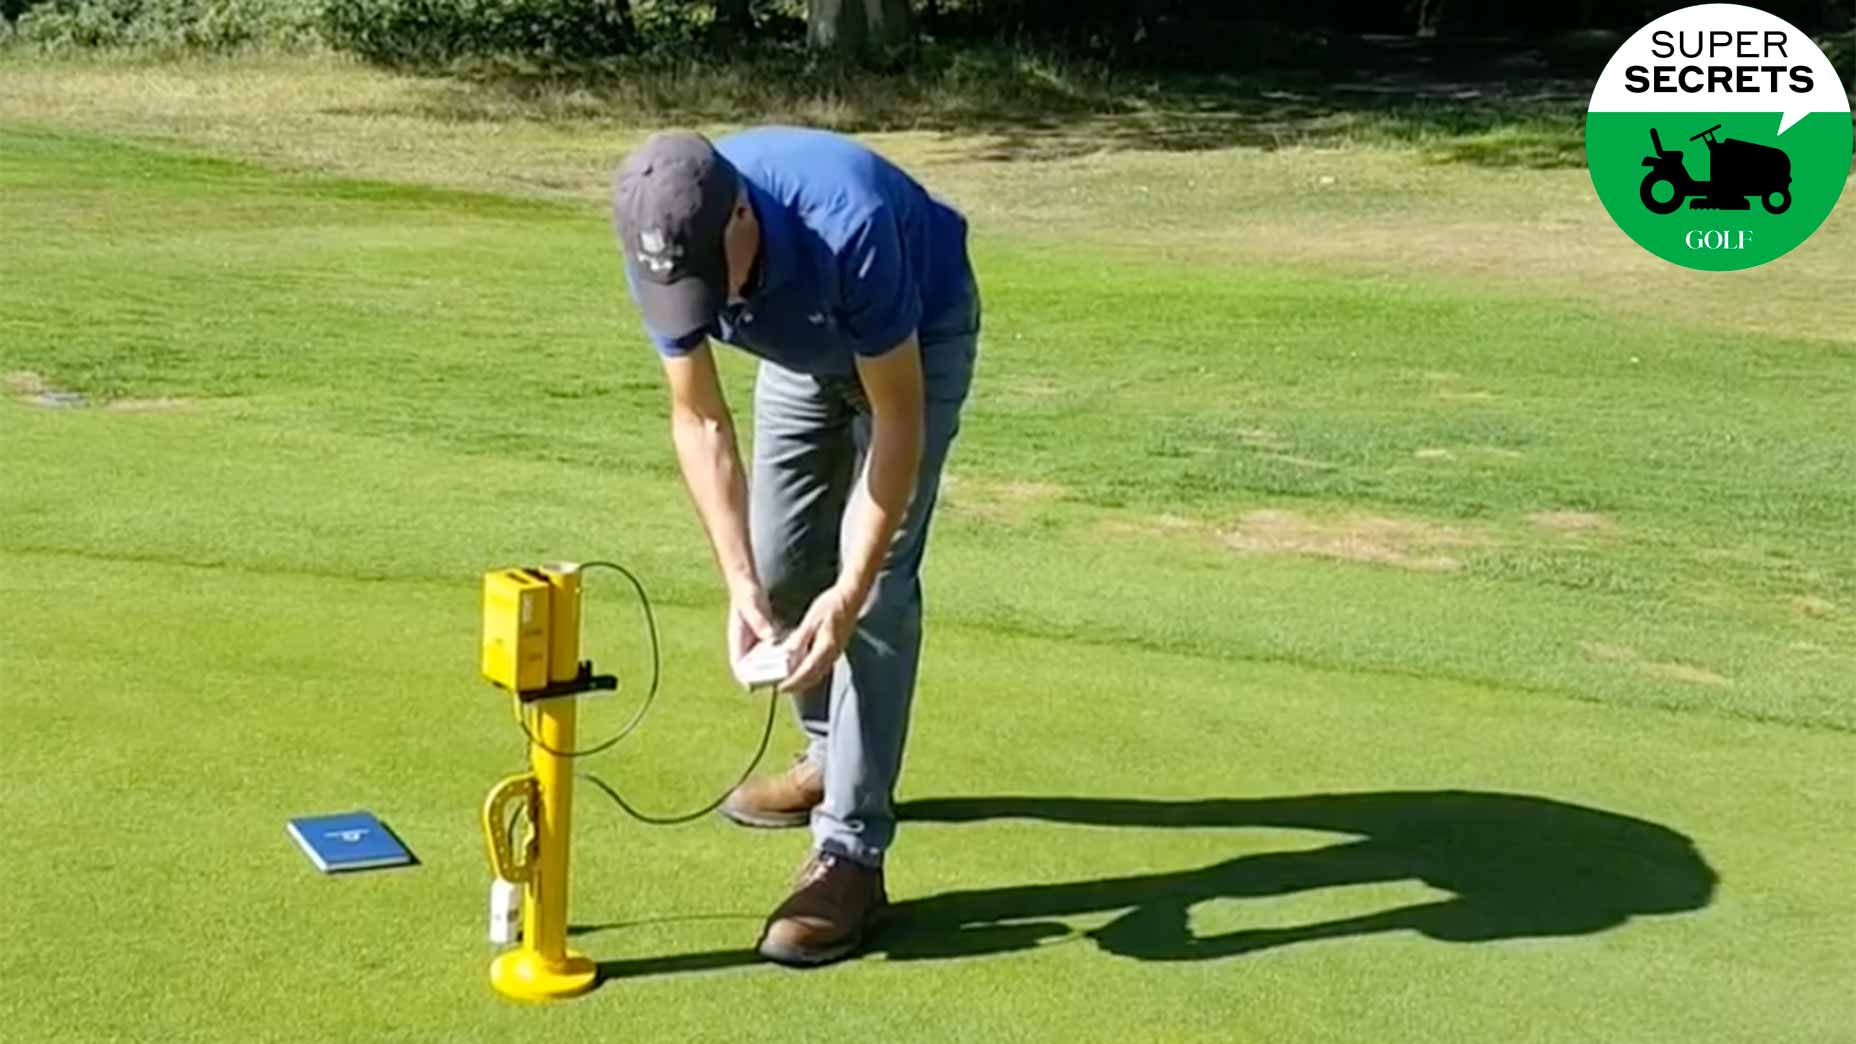 Meet the Clegg Hammer, the golfing direction software you did not know existed